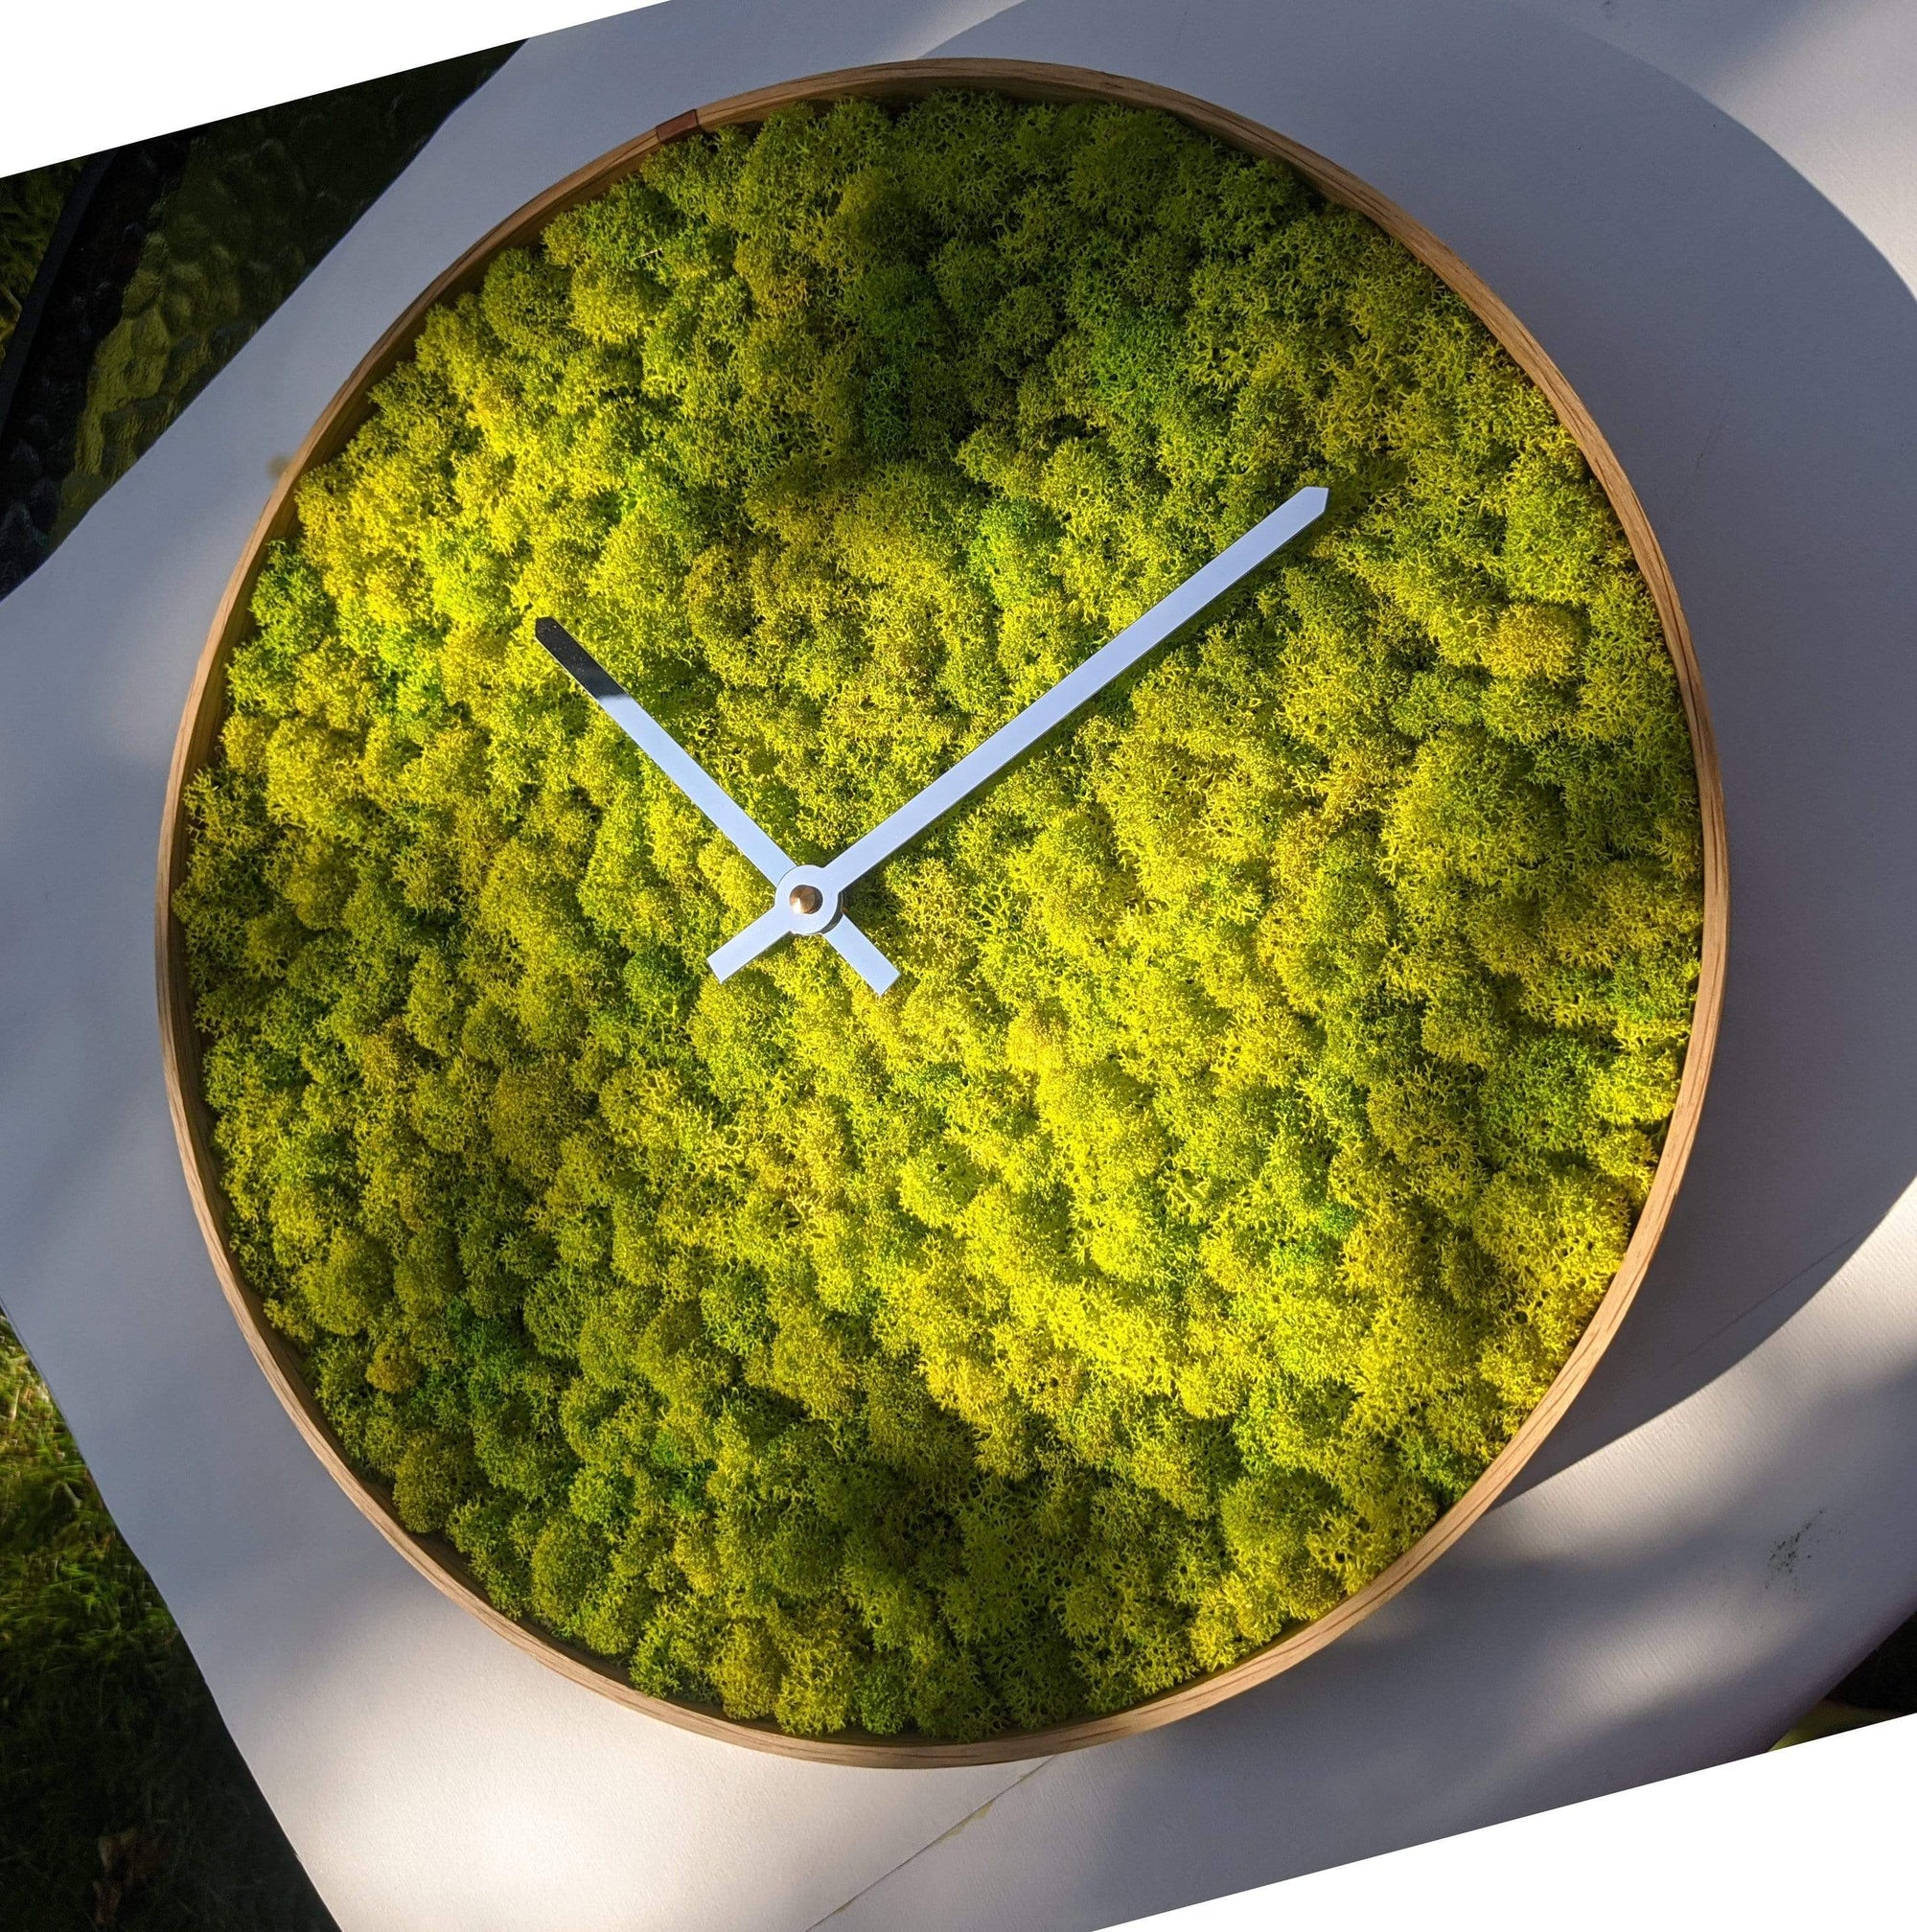 MossTime Moss Wall Clock in May Green uses hand-curved bentwood solid English oak and real Scandinavian reindeer moss with German Hermle clock movement technique for silent quartz, no tick sound | padstyle.com